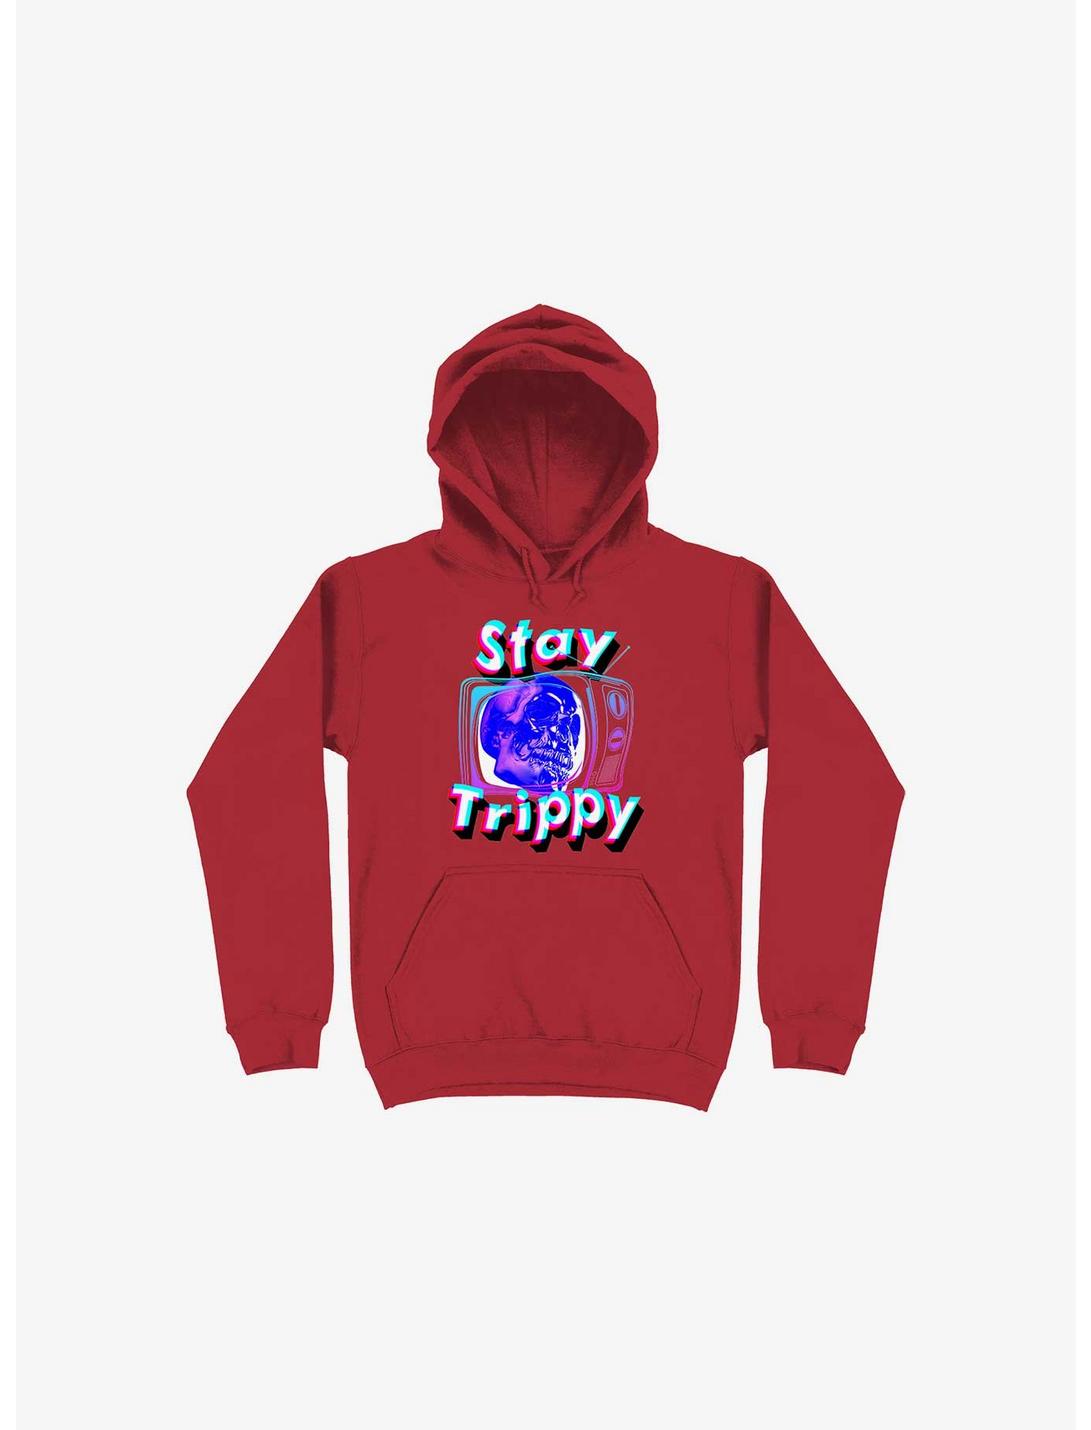 Stay Trippy Cute Retro Aesthetic Universal Vibe Skull Red Hoodie, RED, hi-res